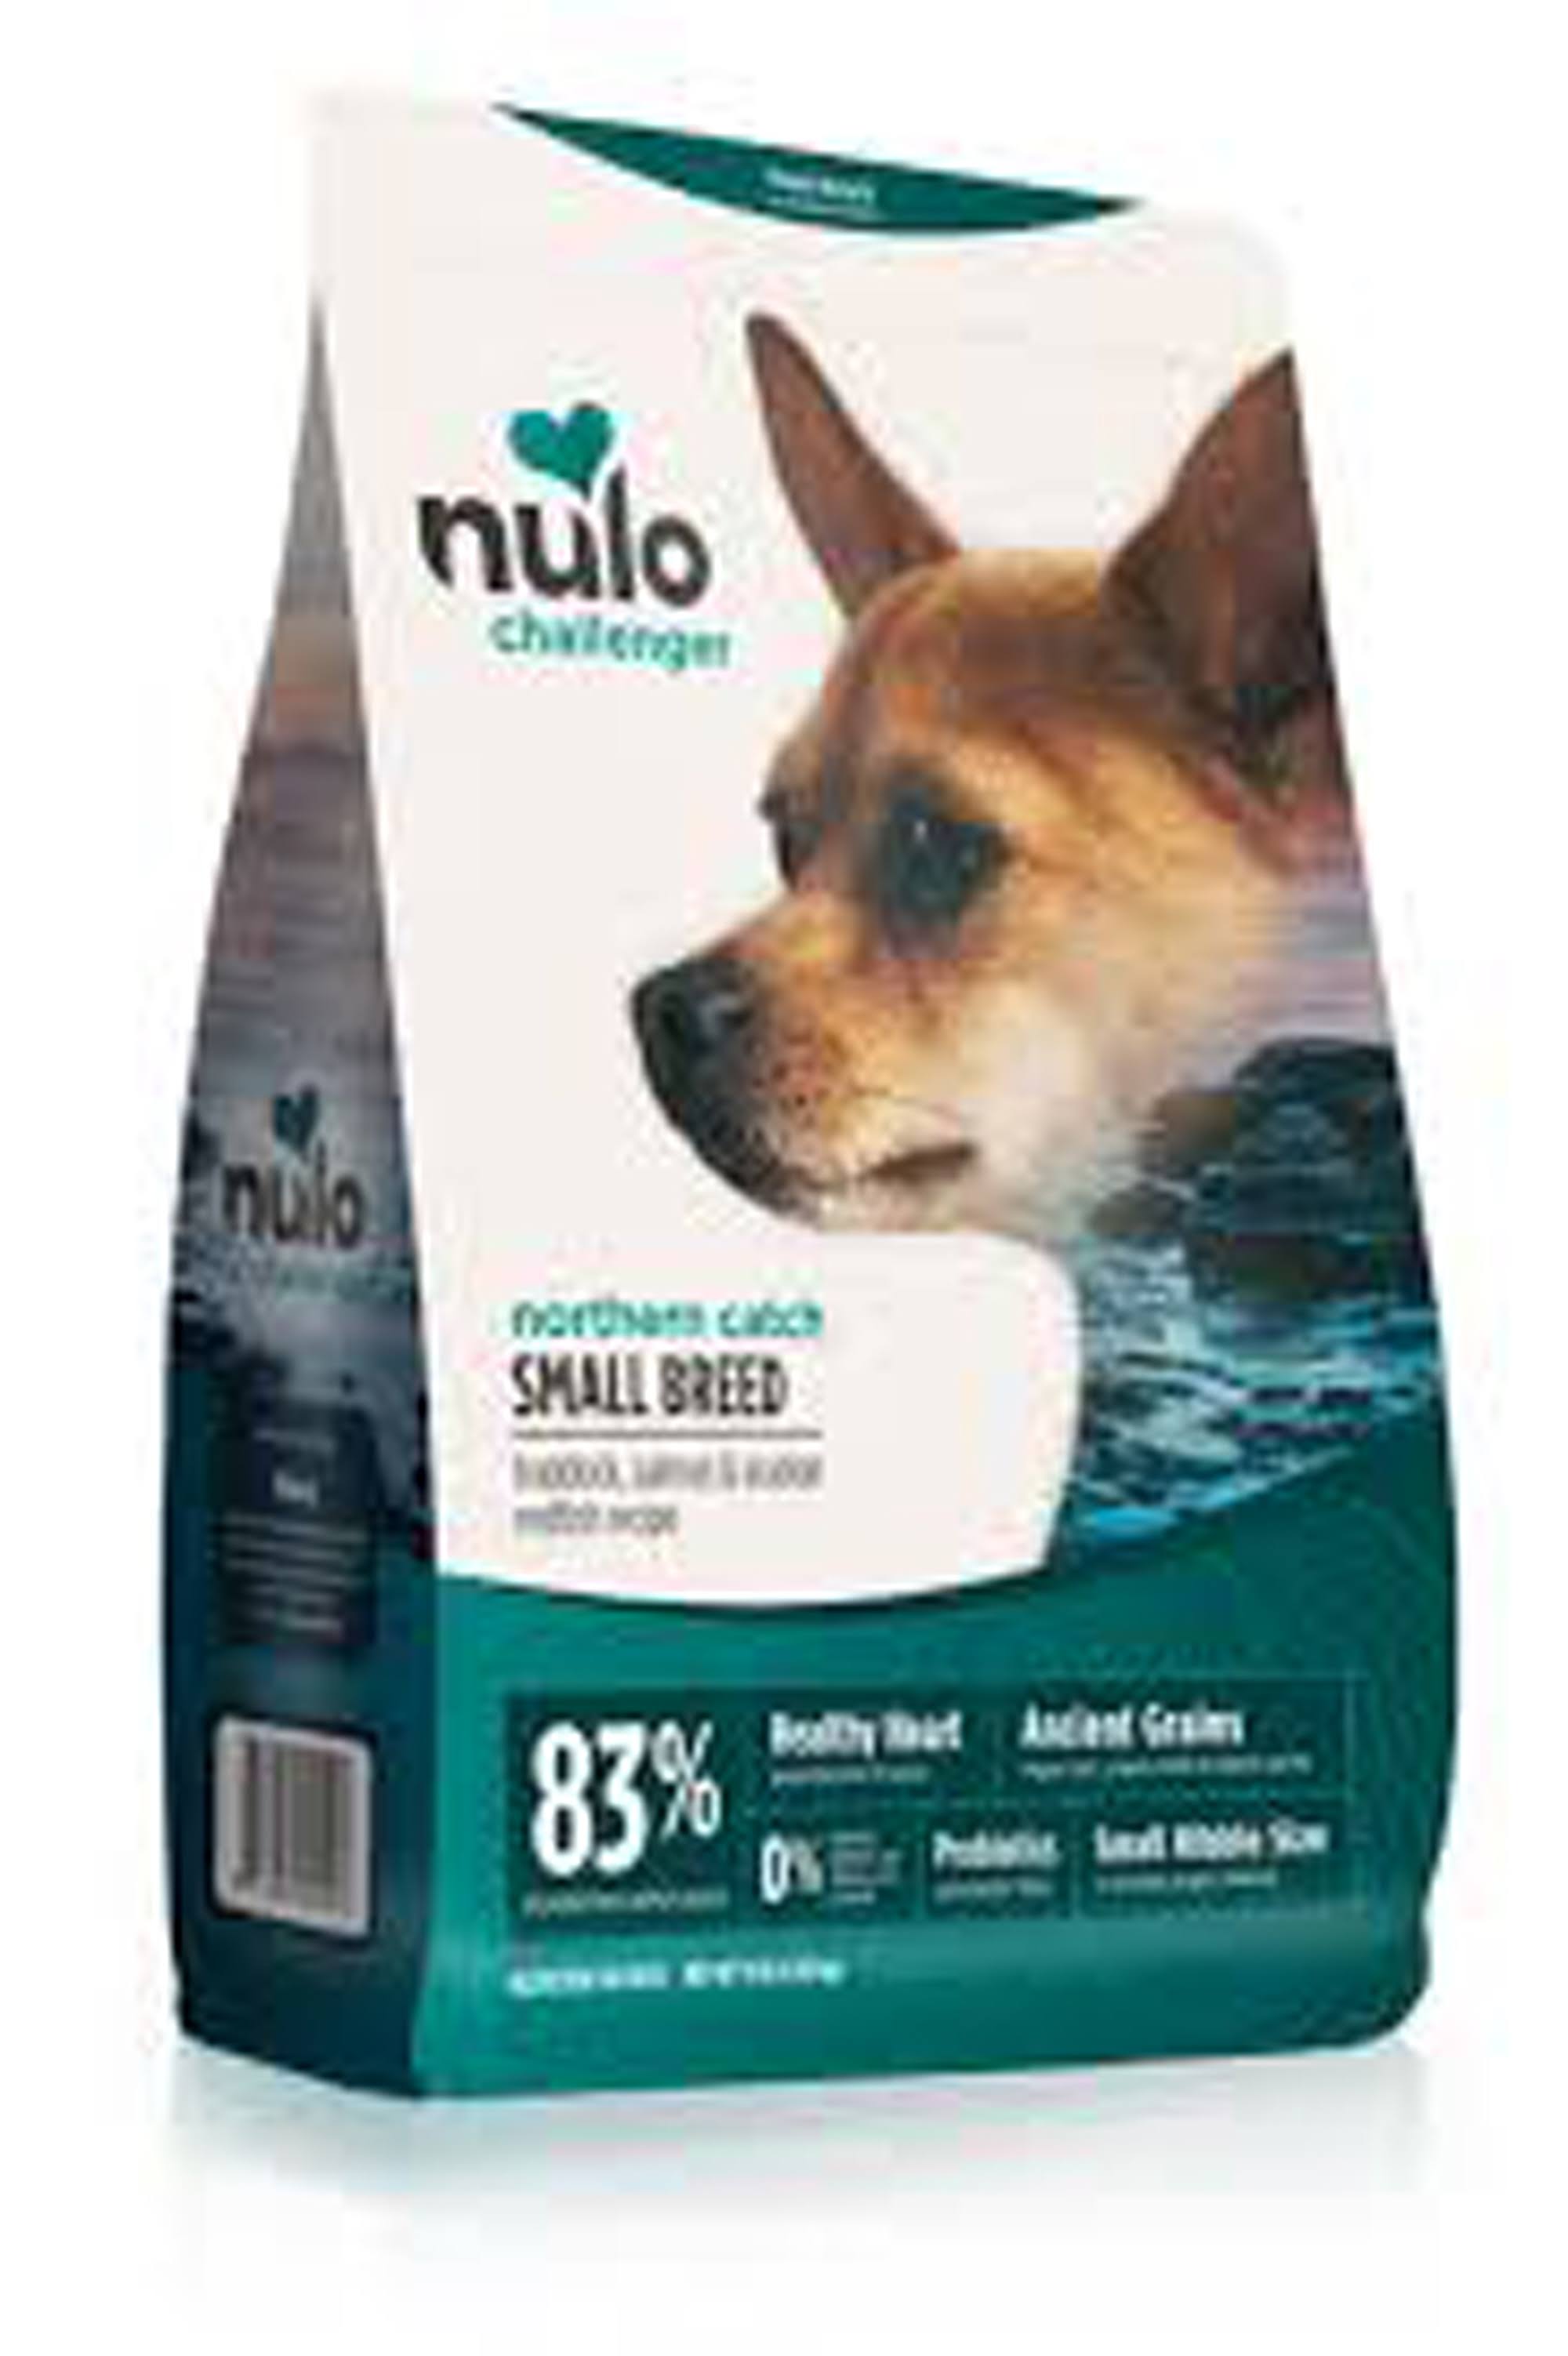 Nulo Challenger Northern Catch Haddock Salmon & Redfish Small Breed Dog Food 11 lbs